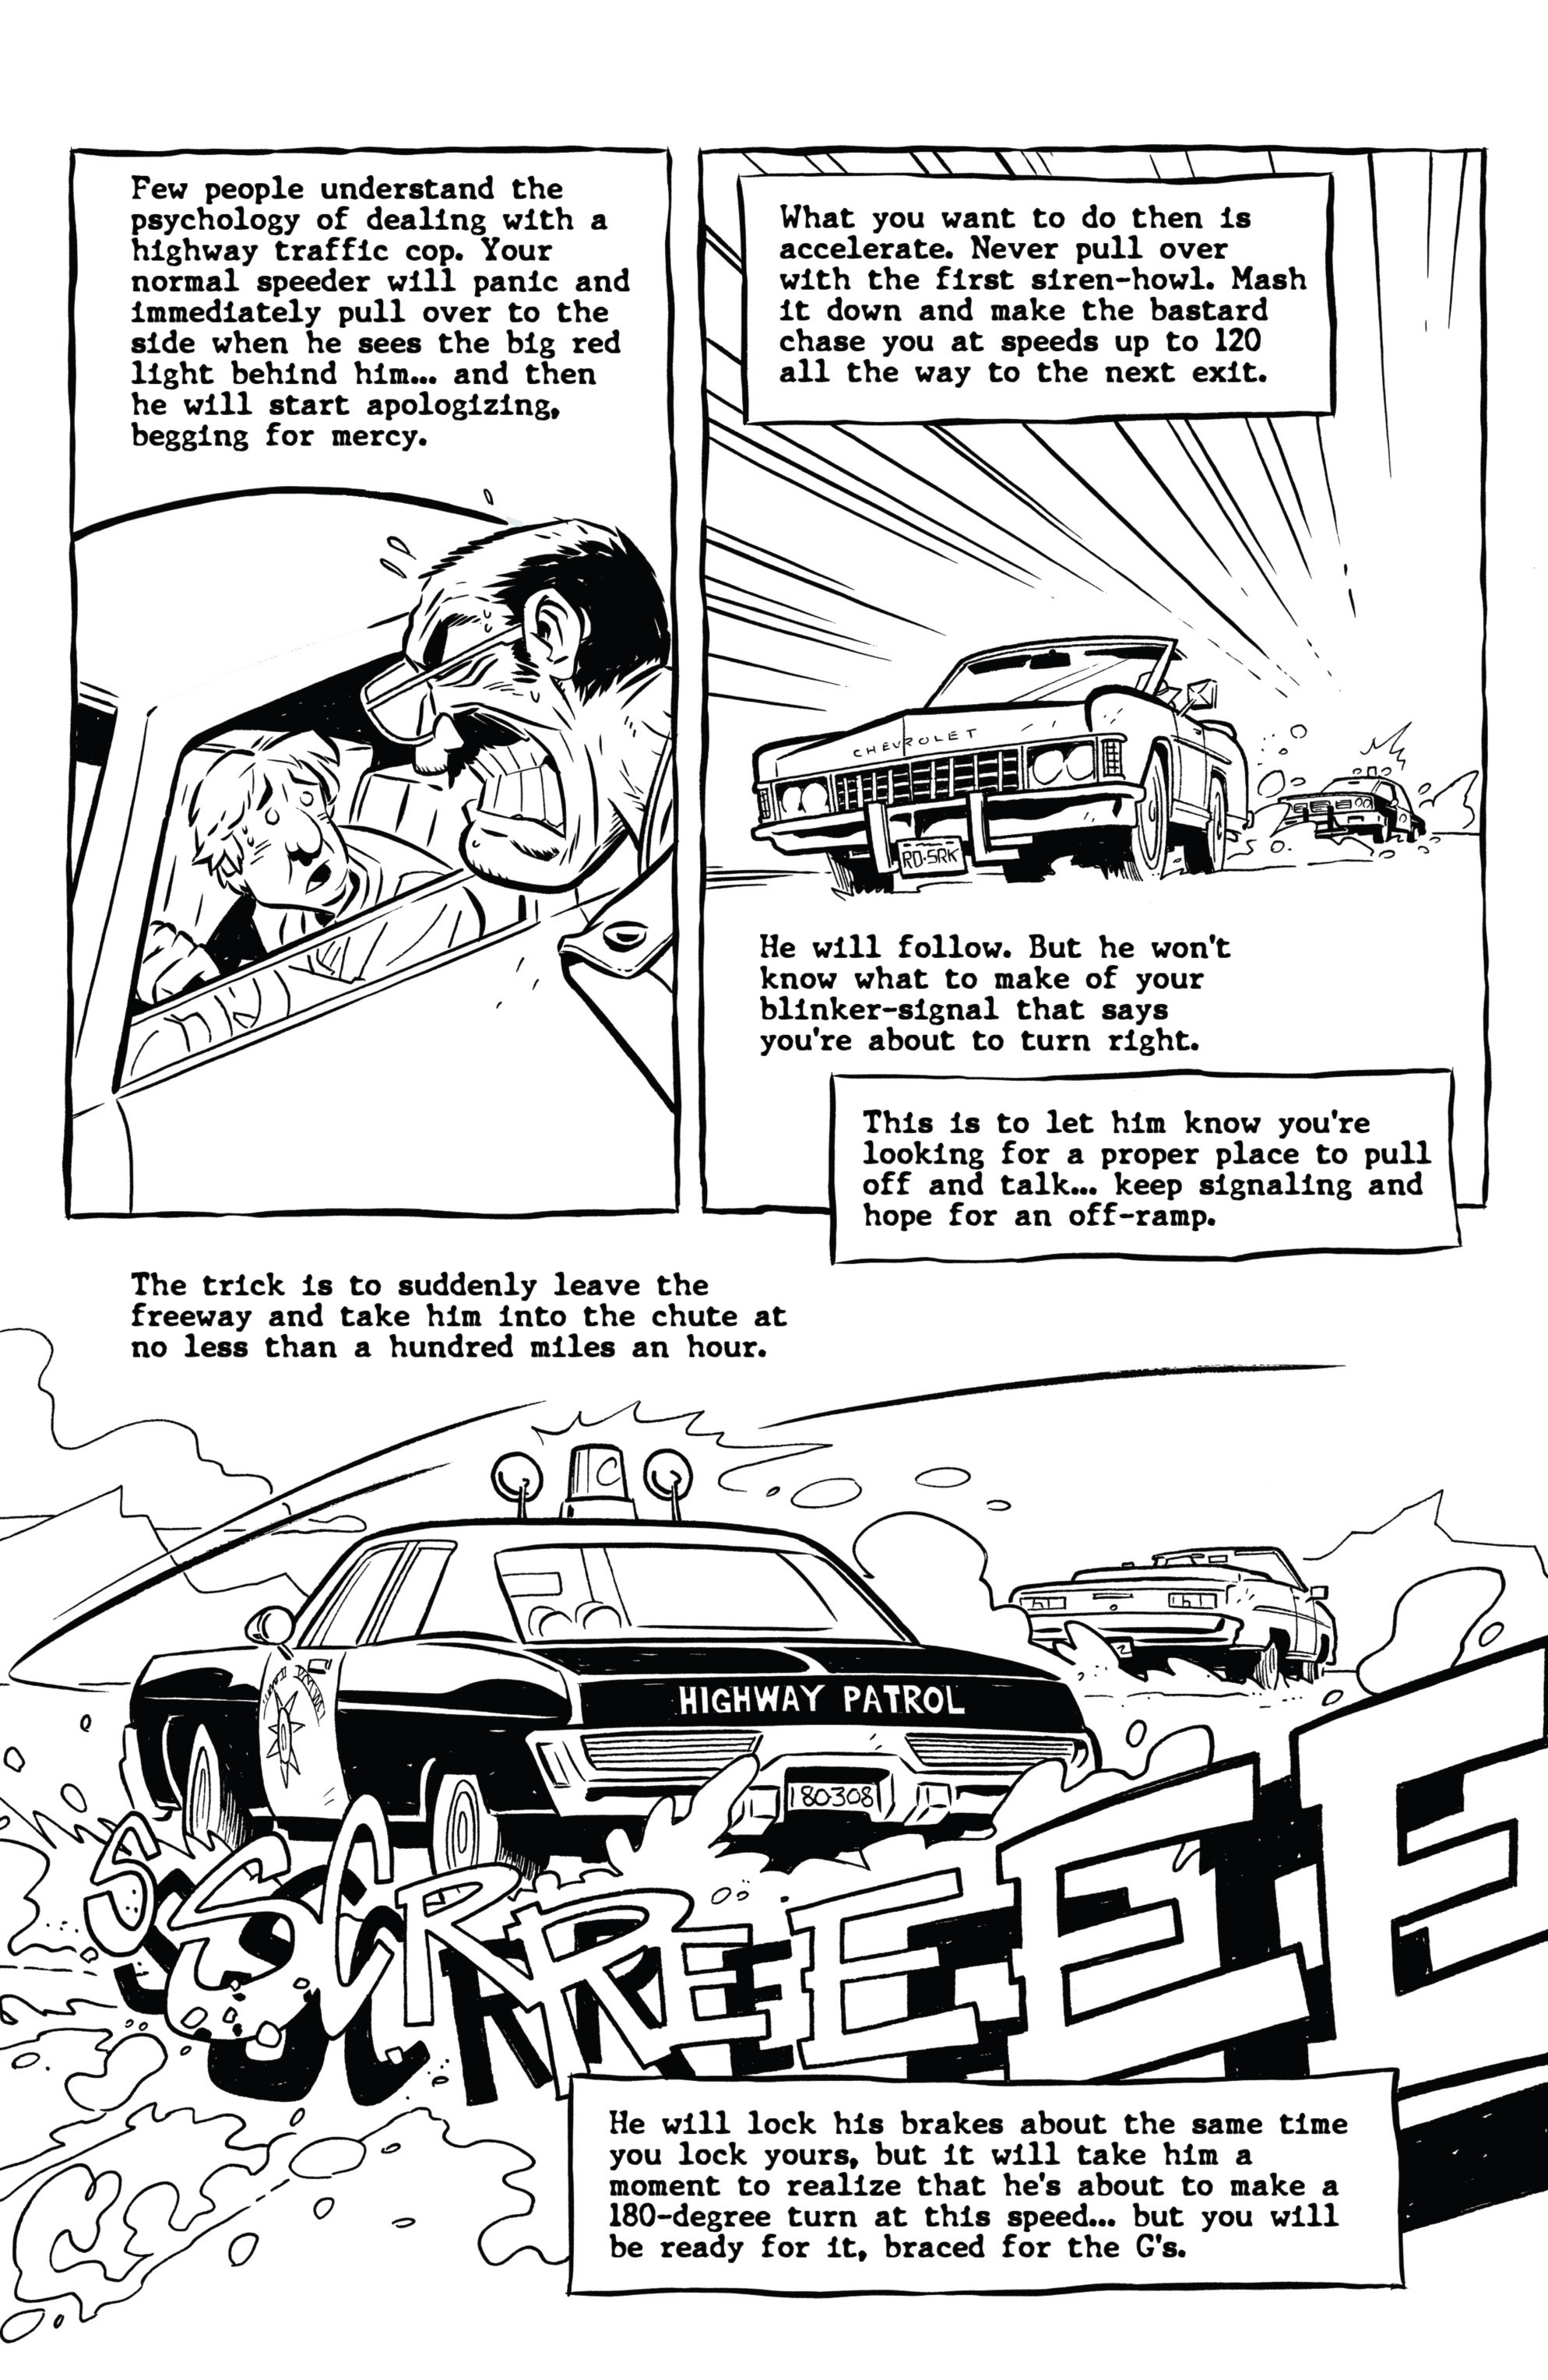 Read online Hunter S. Thompson's Fear and Loathing in Las Vegas comic -  Issue #3 - 6